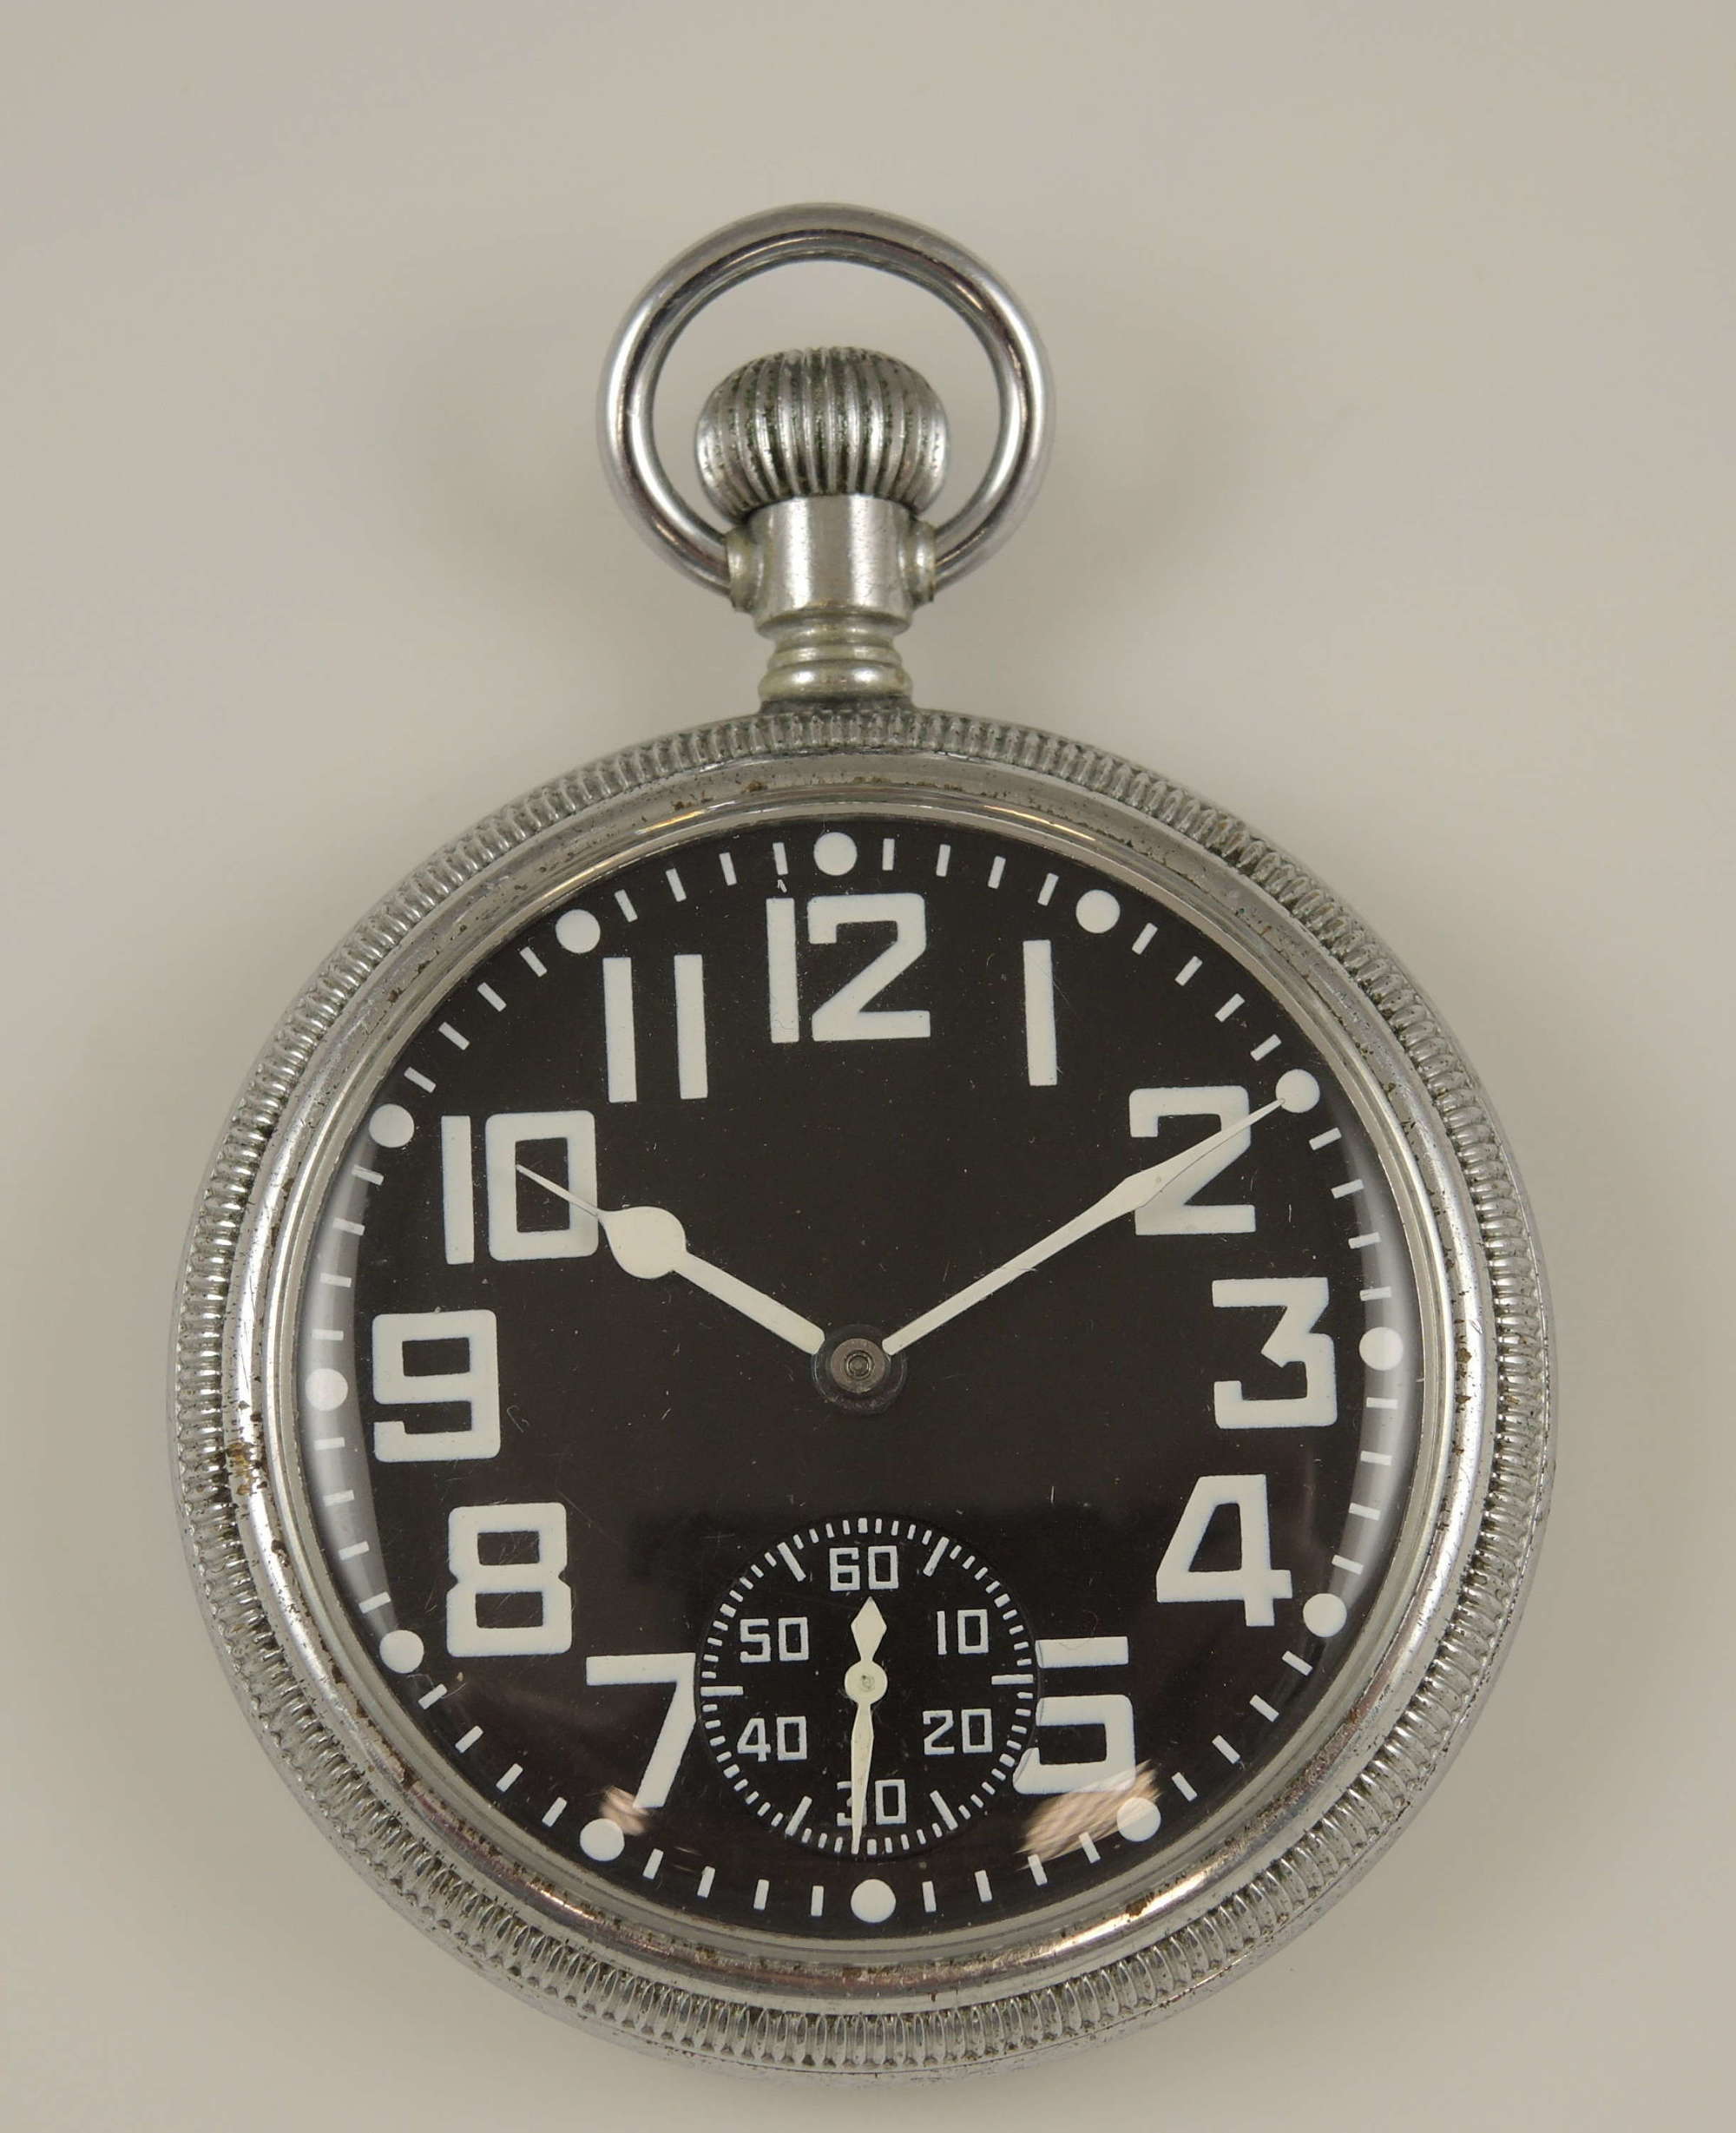 Rare military pocket watch by Waltham. Non luminous dial c1942